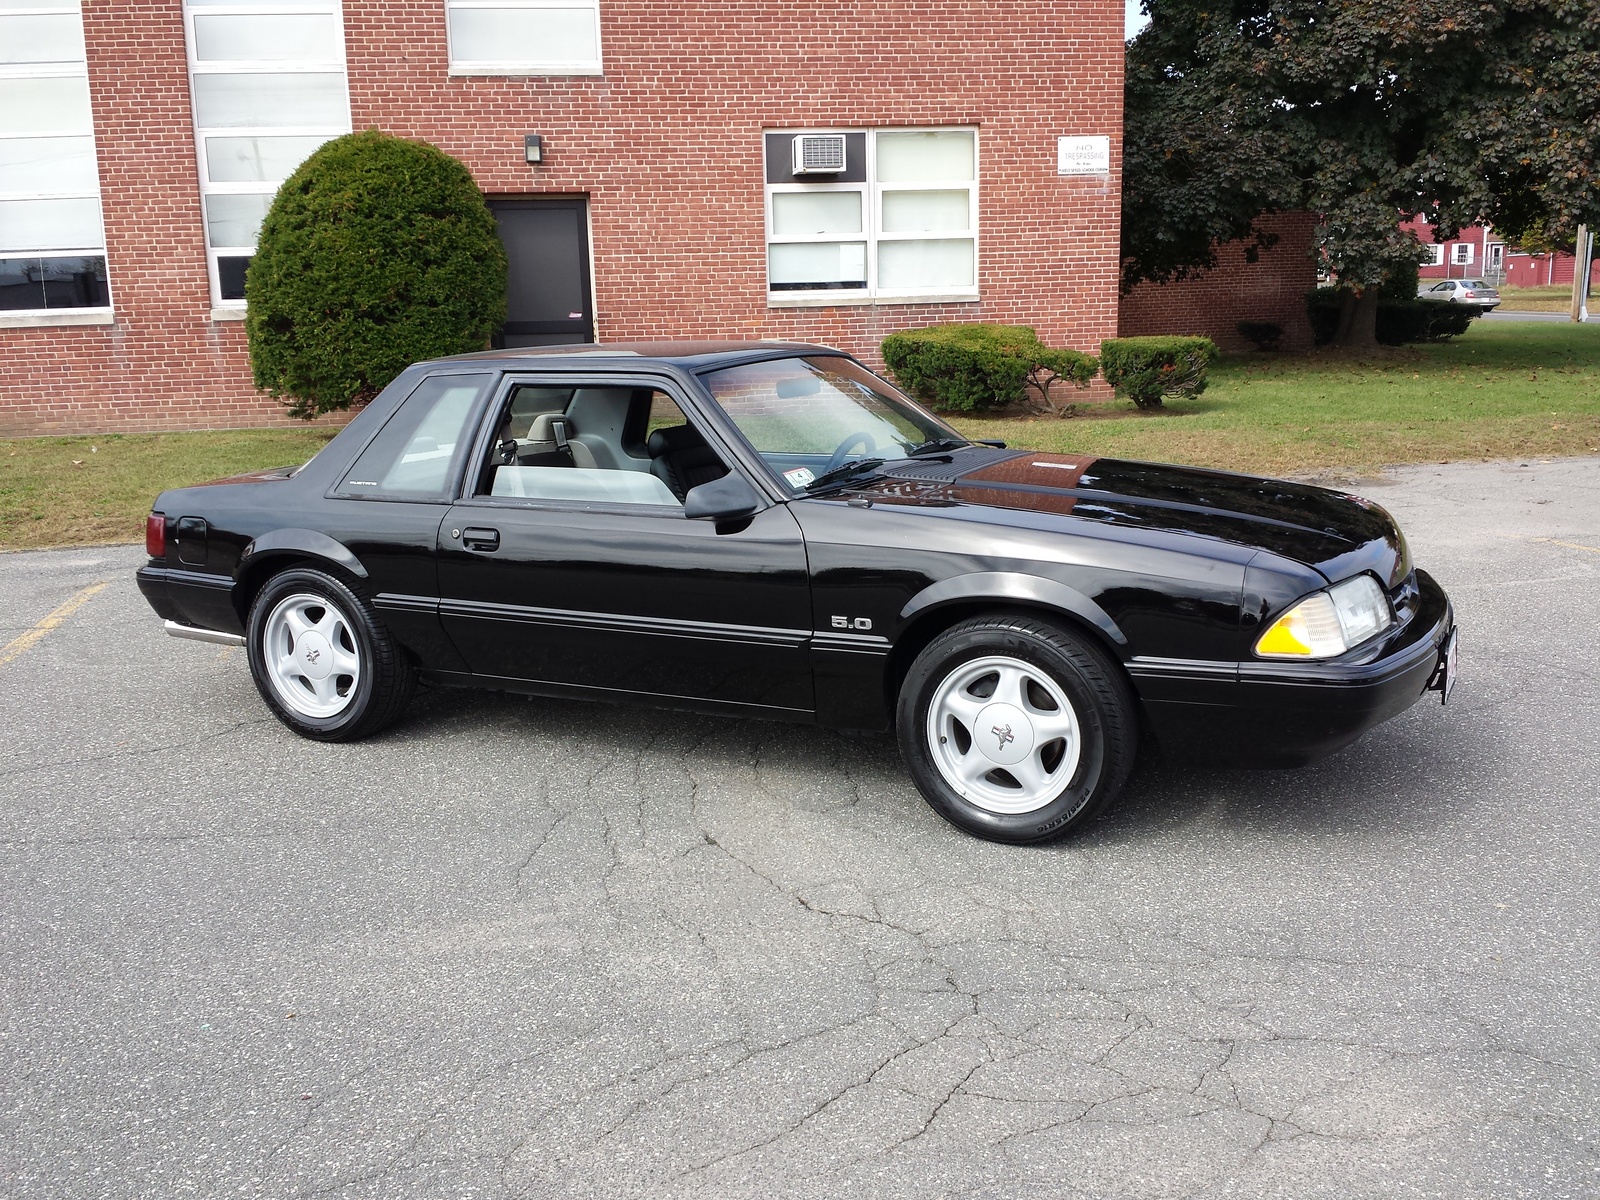 1991 Ford mustang lx specs #4